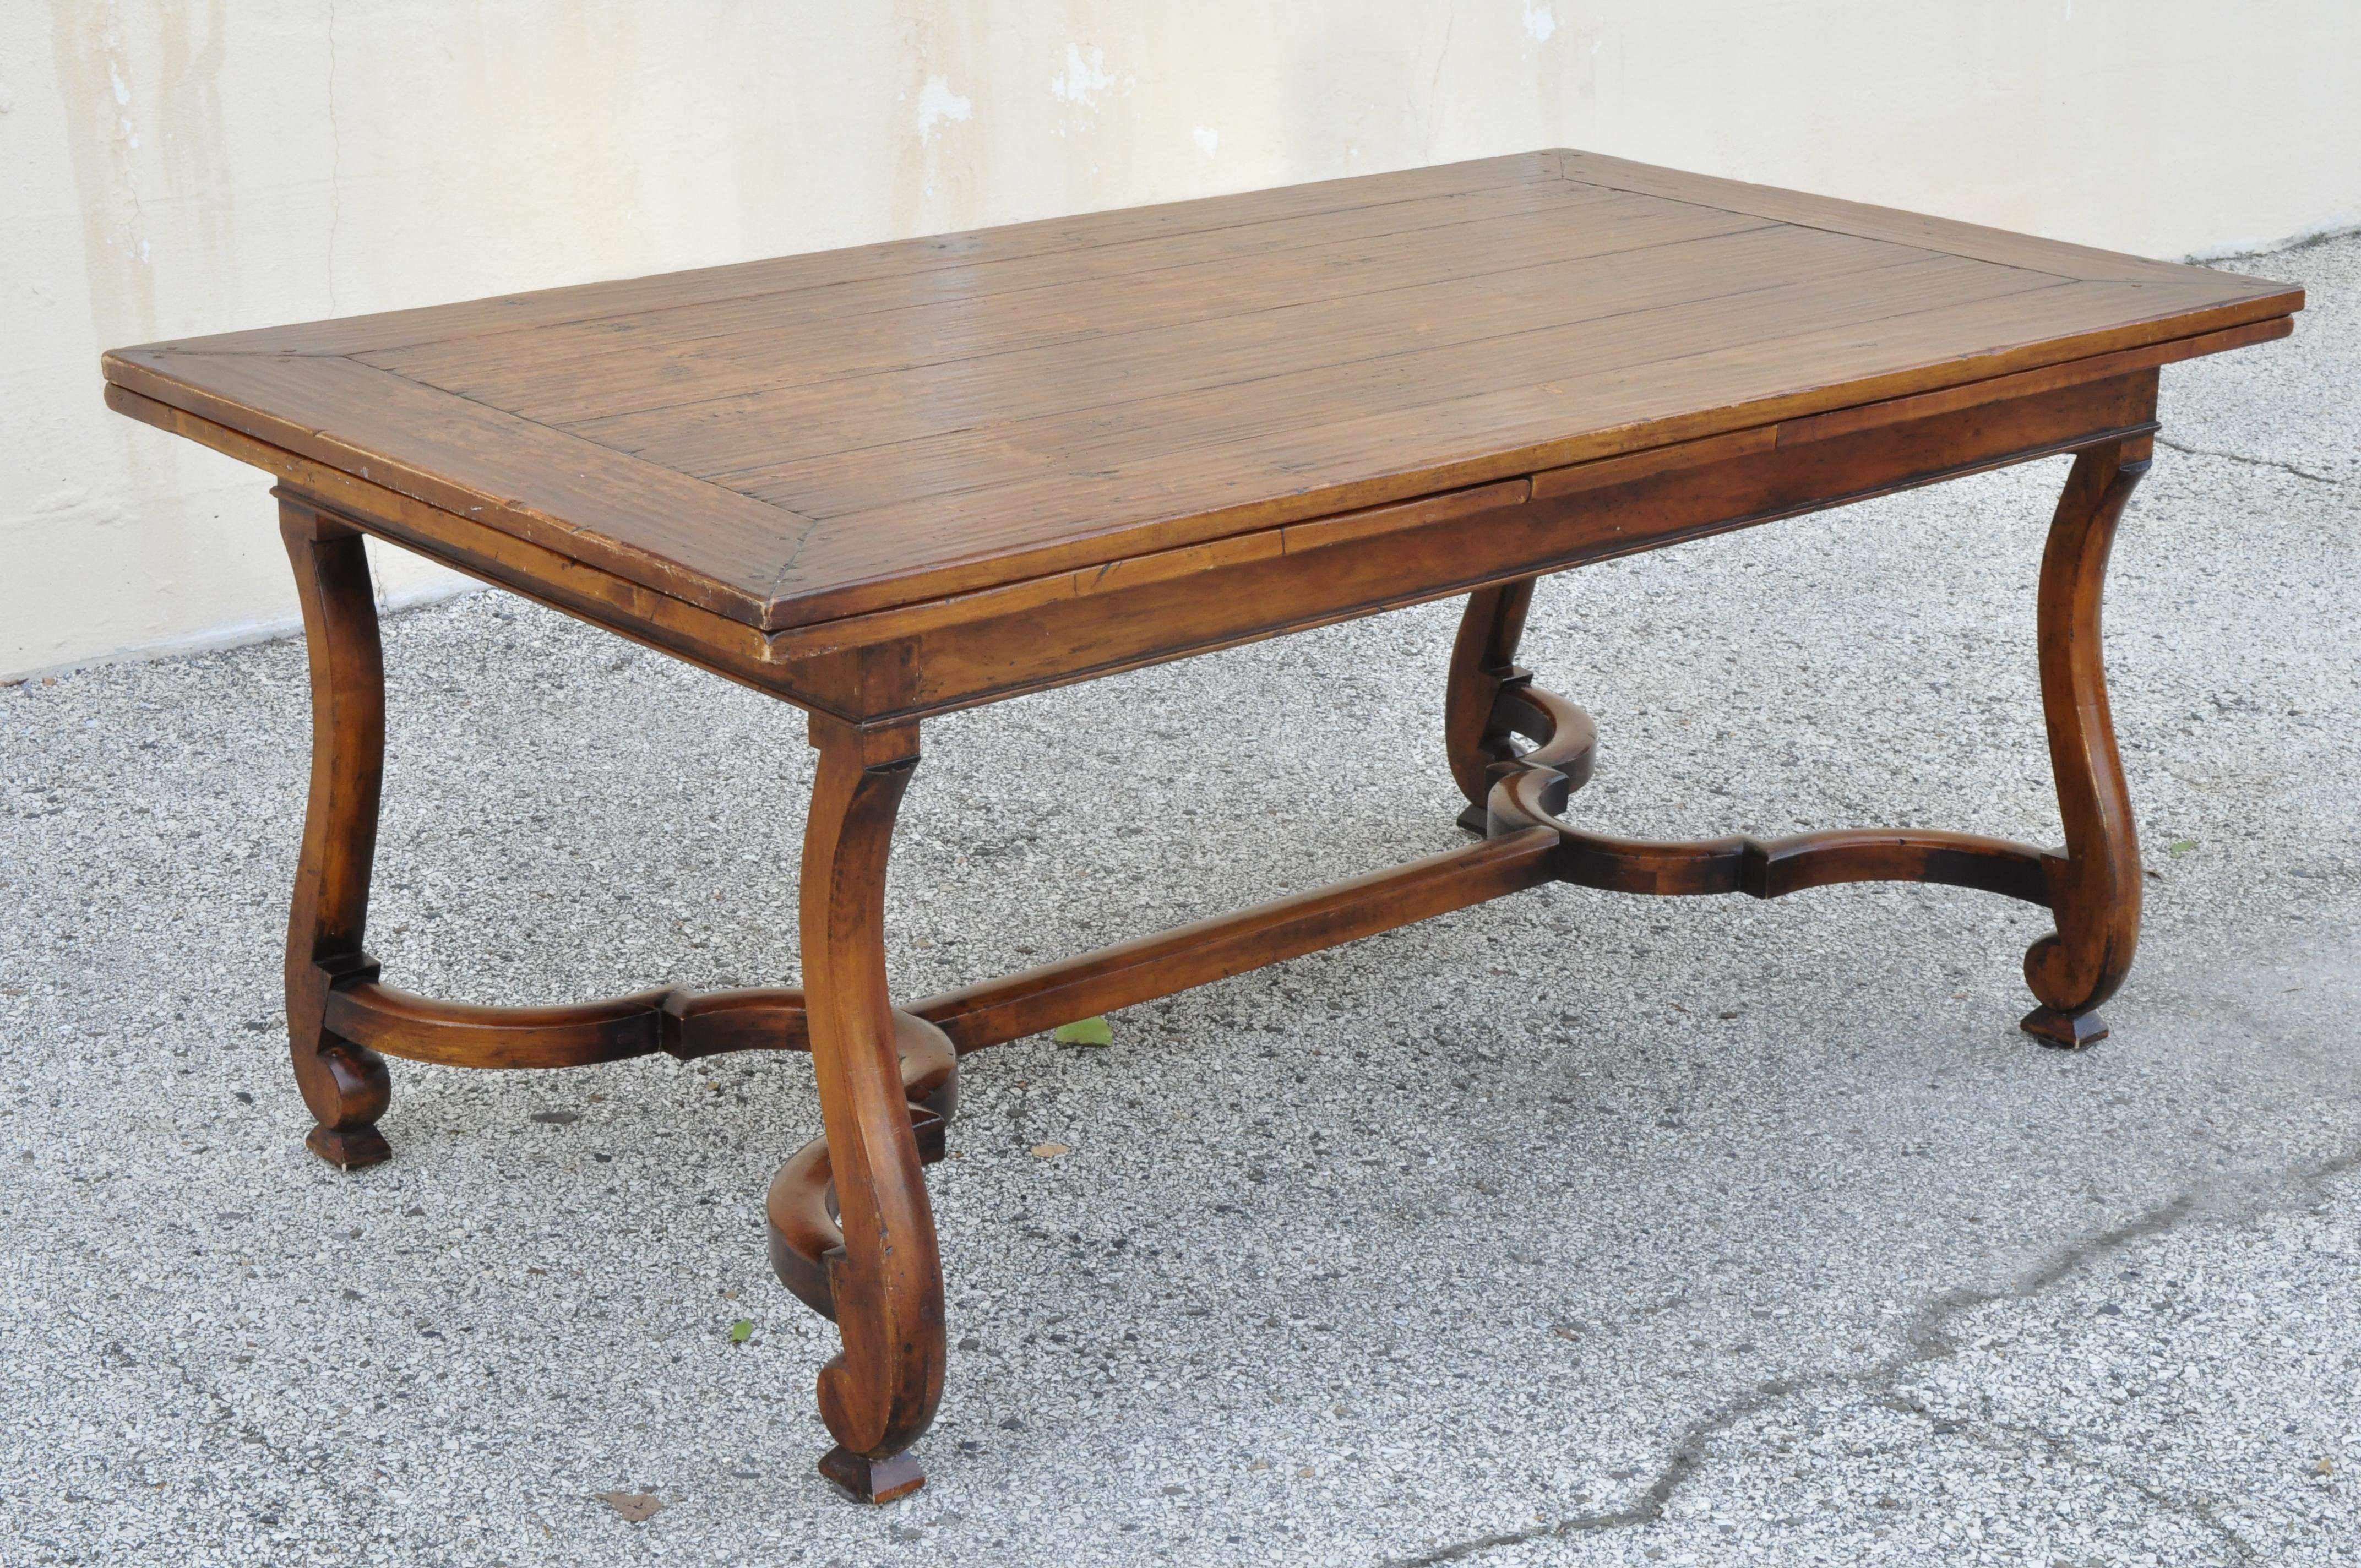 Henredon Acquisitions collections Orleans draw leaf dining room table. Listing includes 2 pullout / pull-out extension leaves, stretcher base, solid wood construction, beautiful wood grain, distressed finish, nicely carved details, original label,